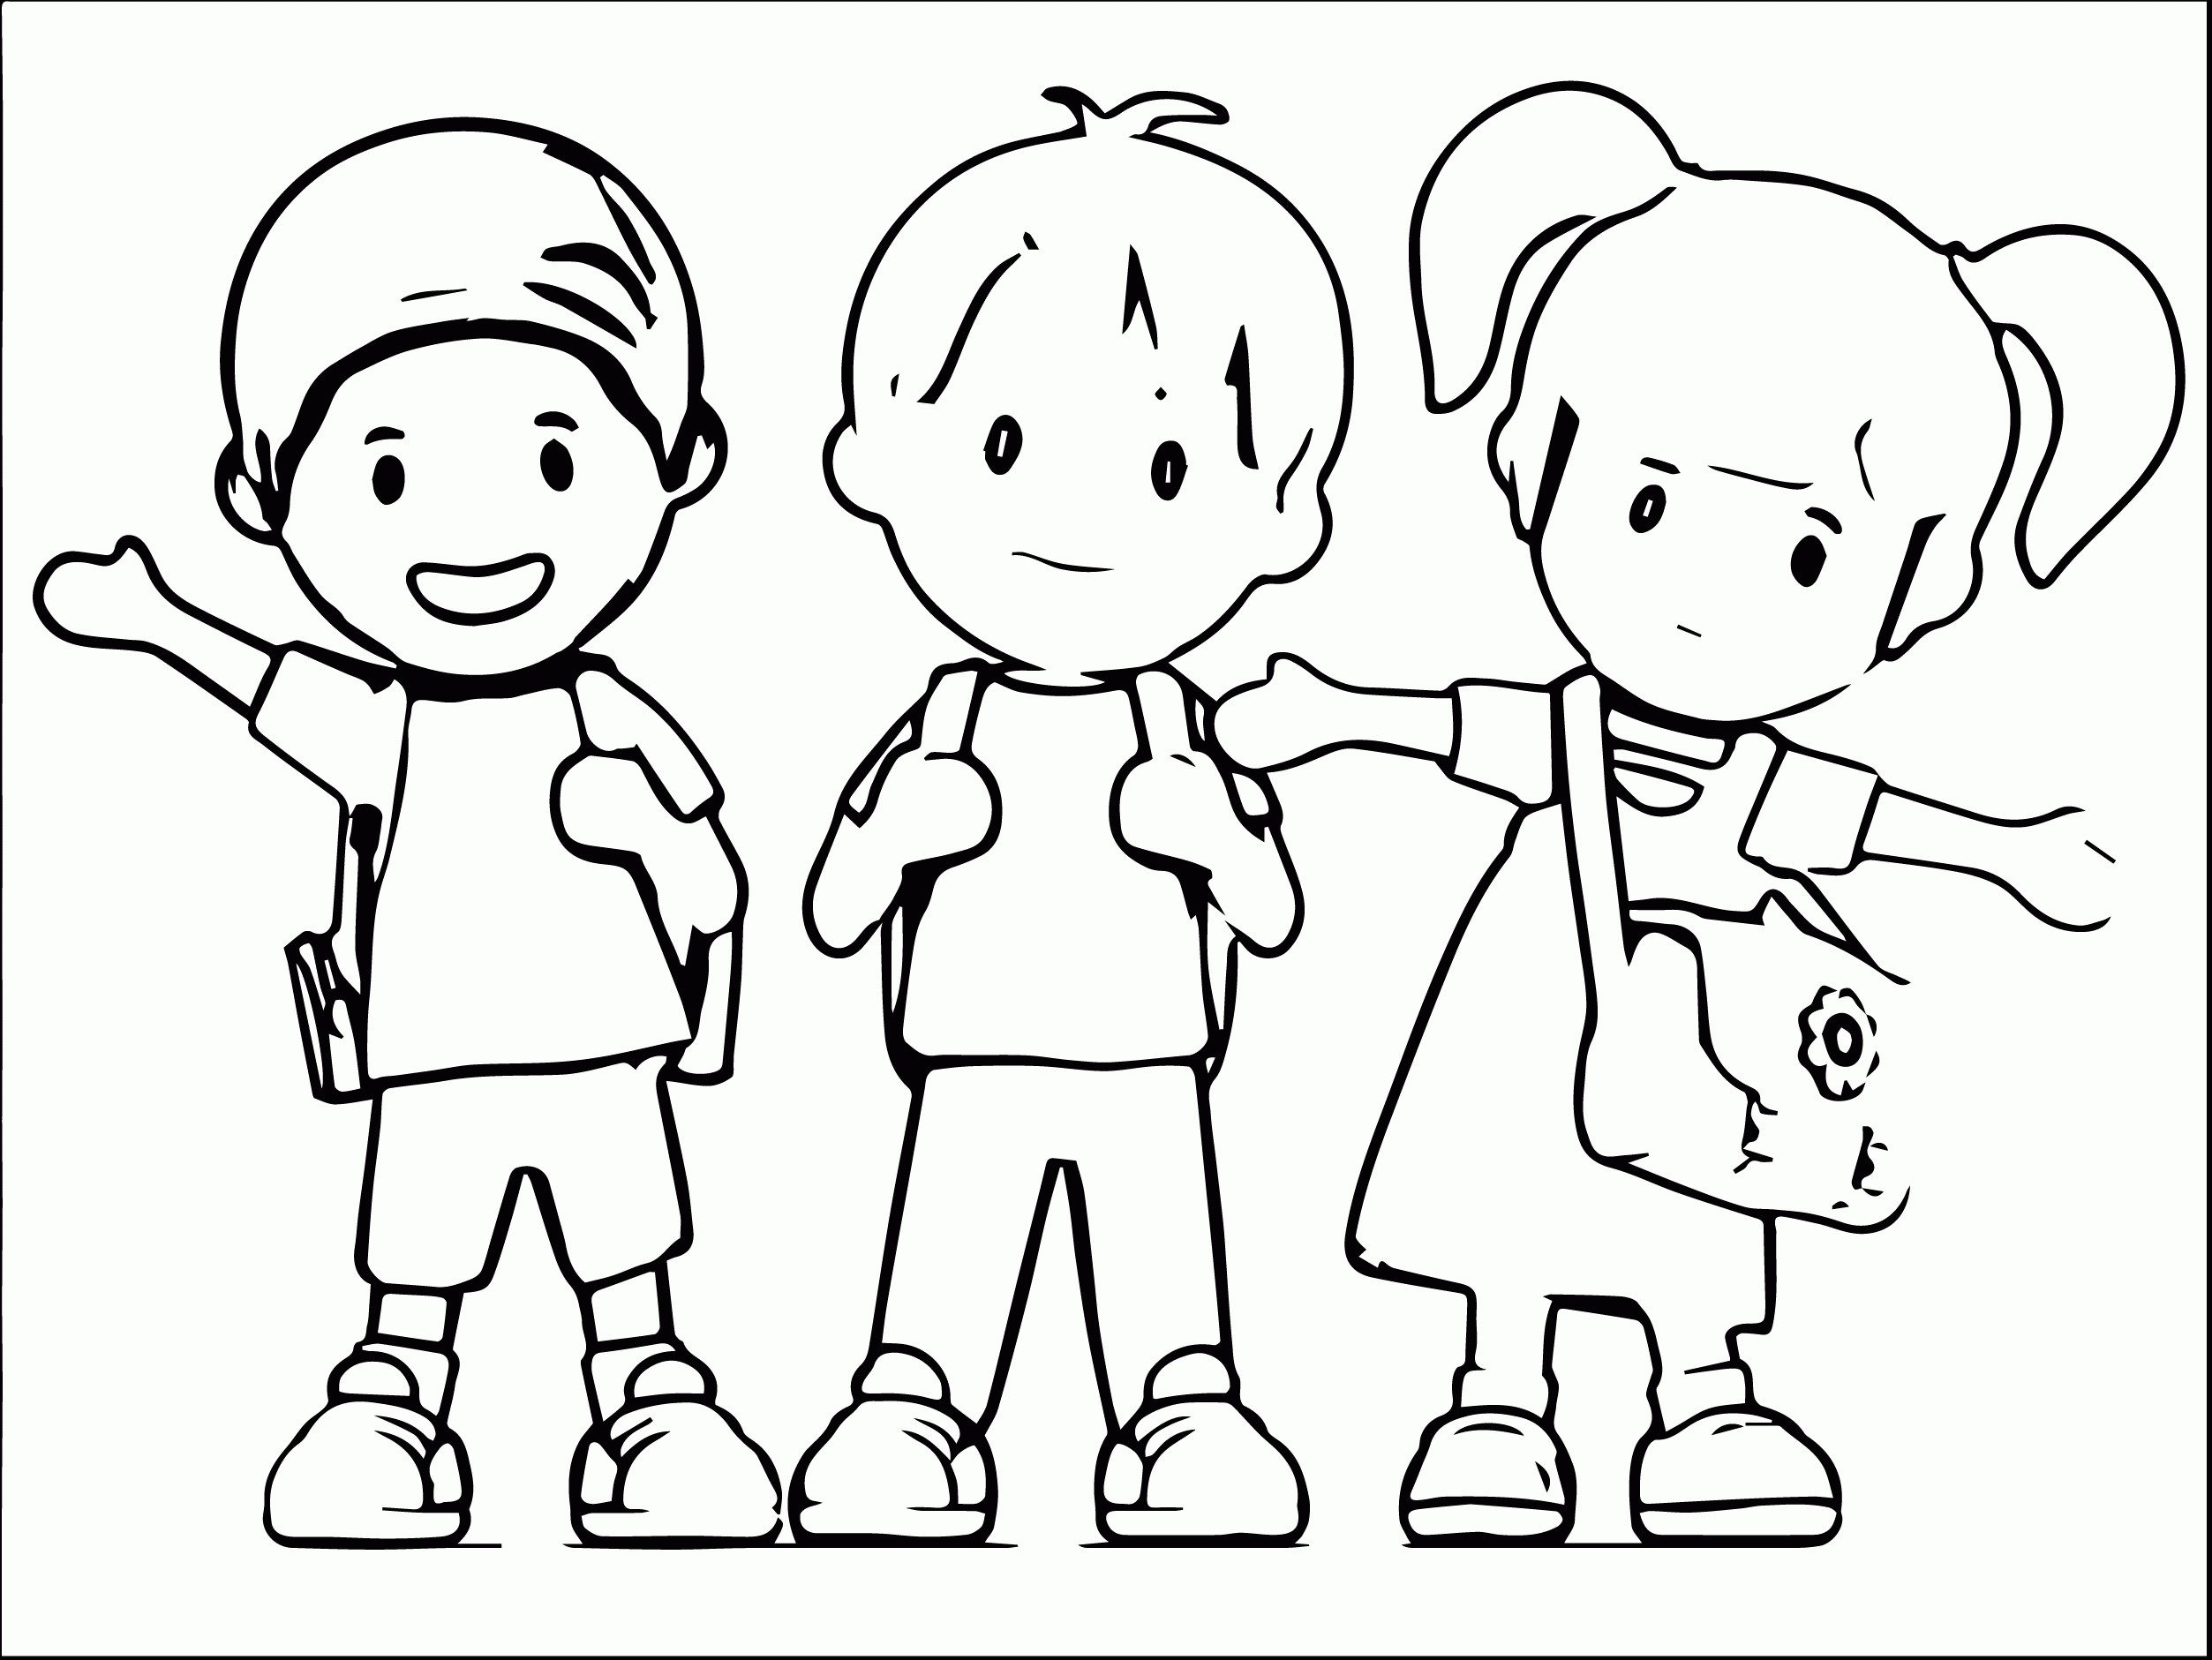 Child At School Coloring Page - Coloring Home